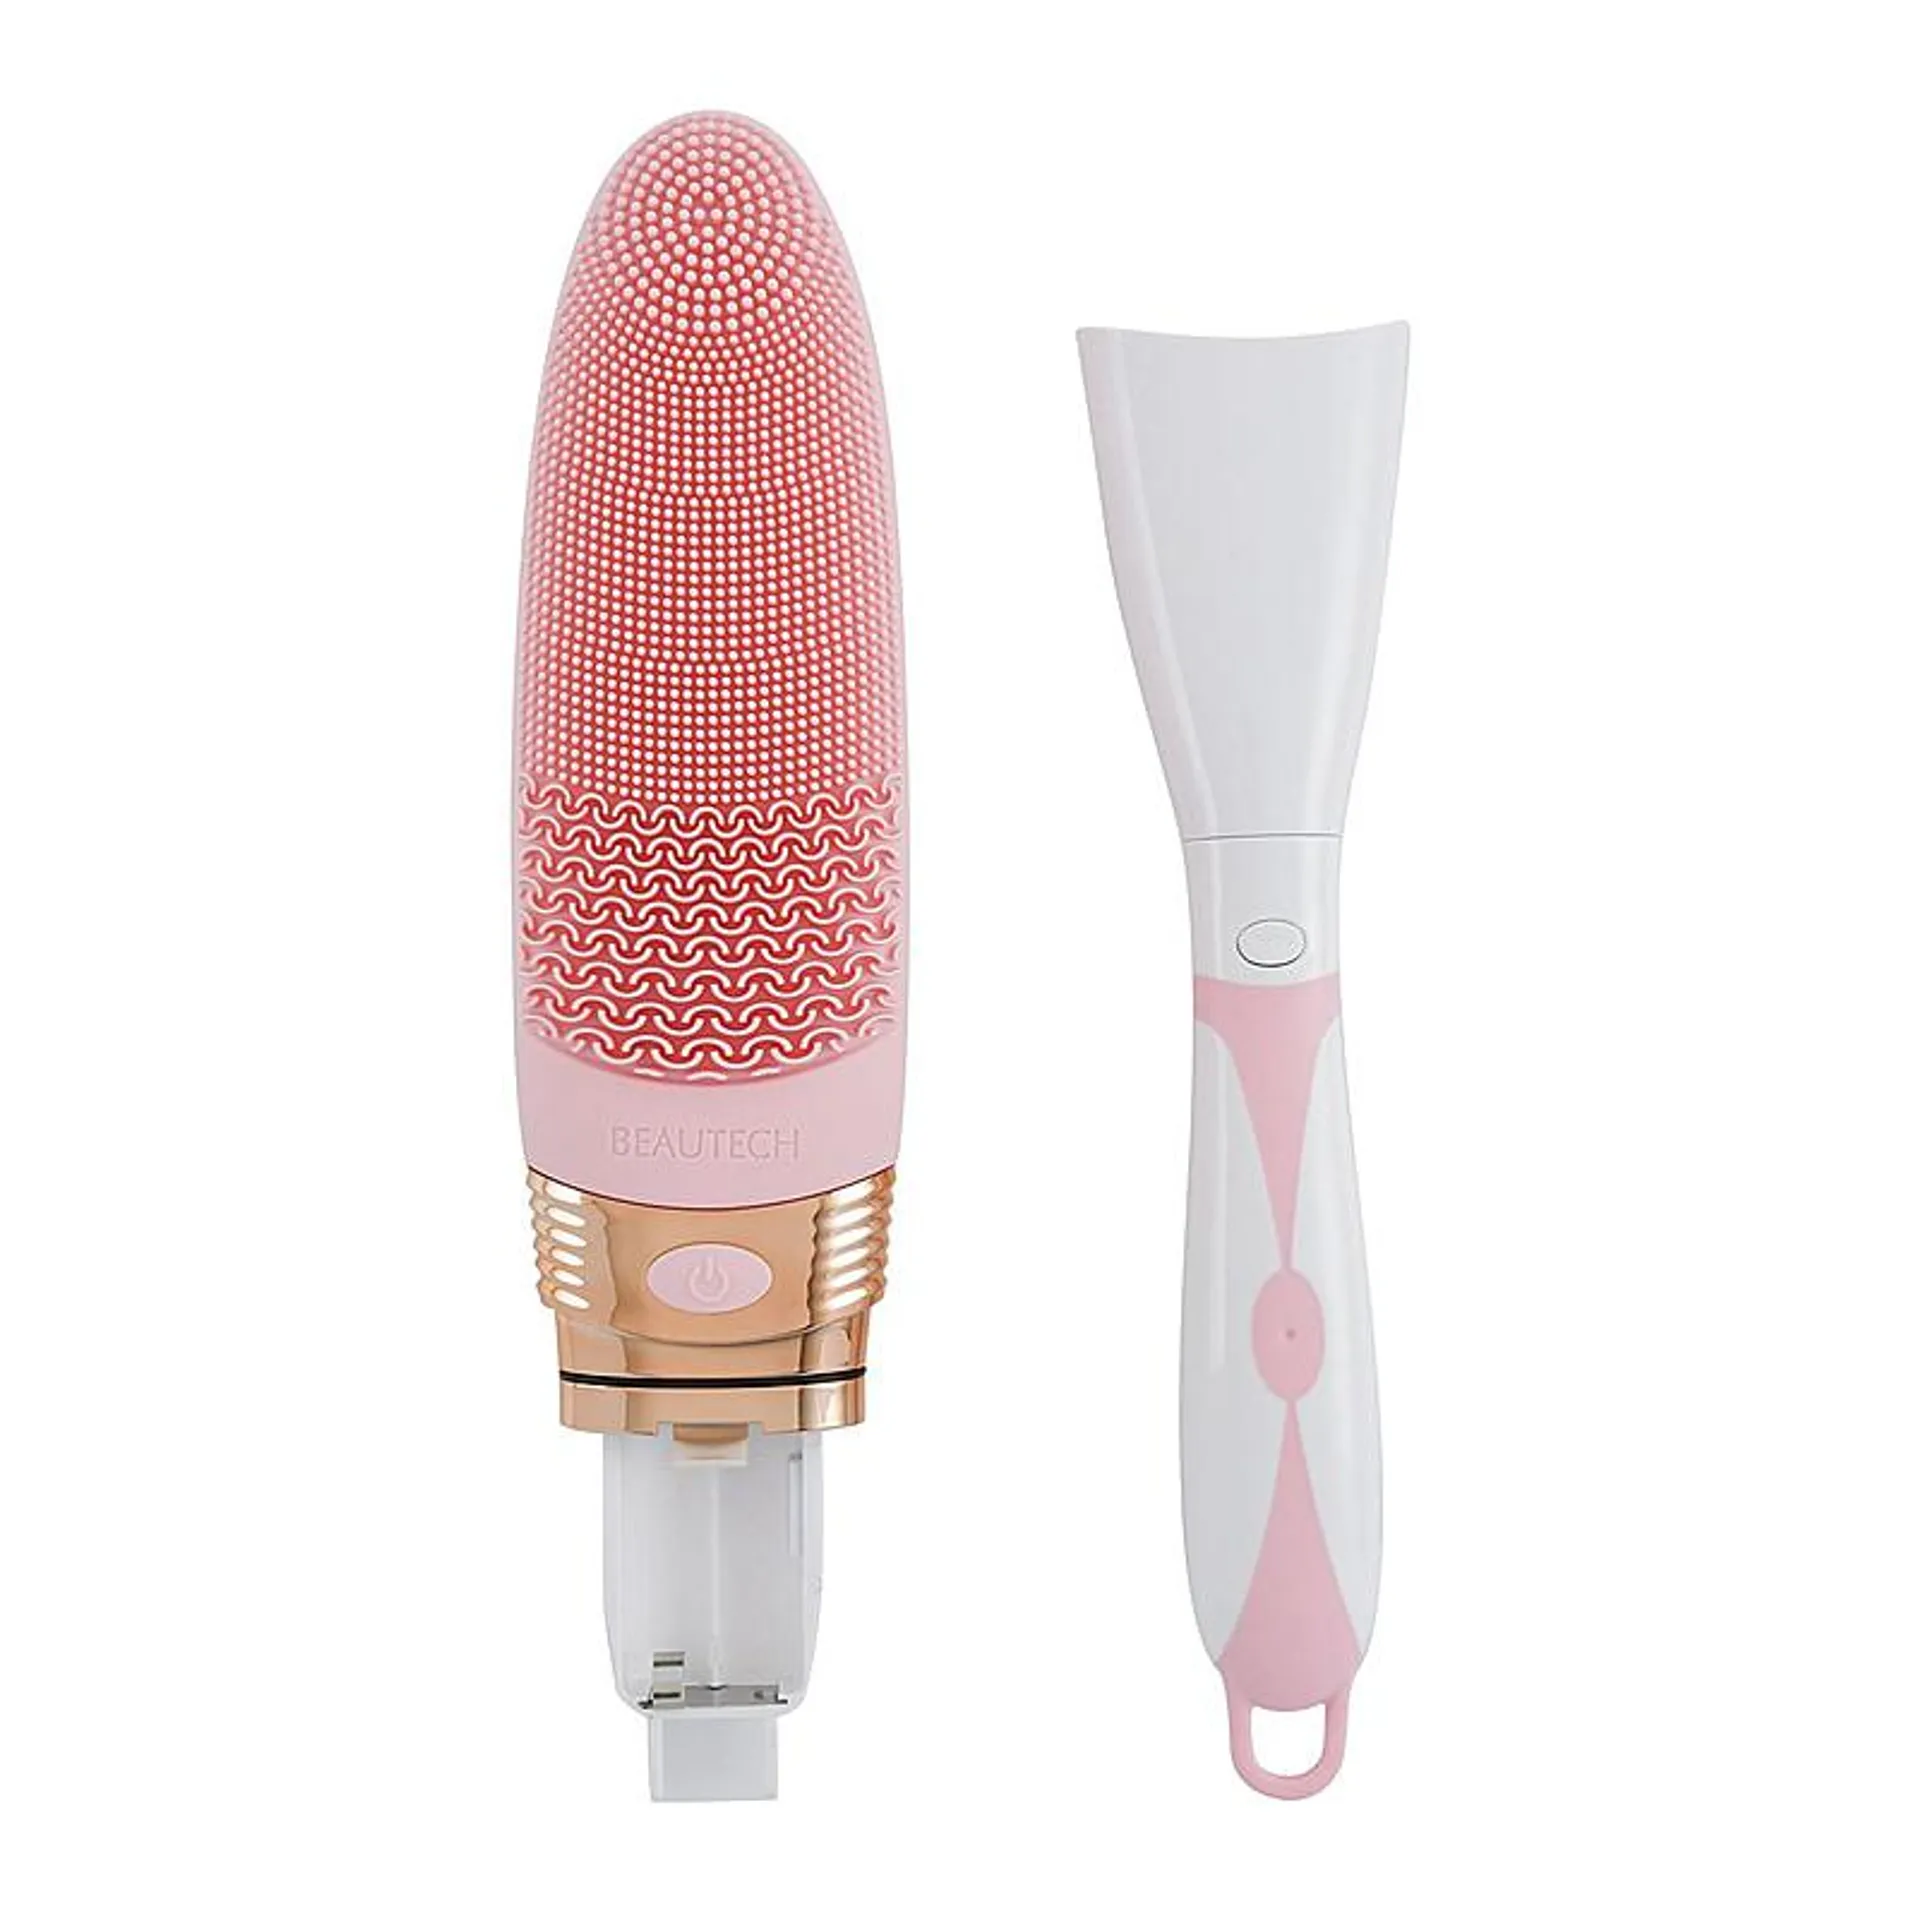 Electric Rotating Vibration Long Handle Silicone Bath Brush (Requires 2AA Batteries,Not Inc.) - Pink